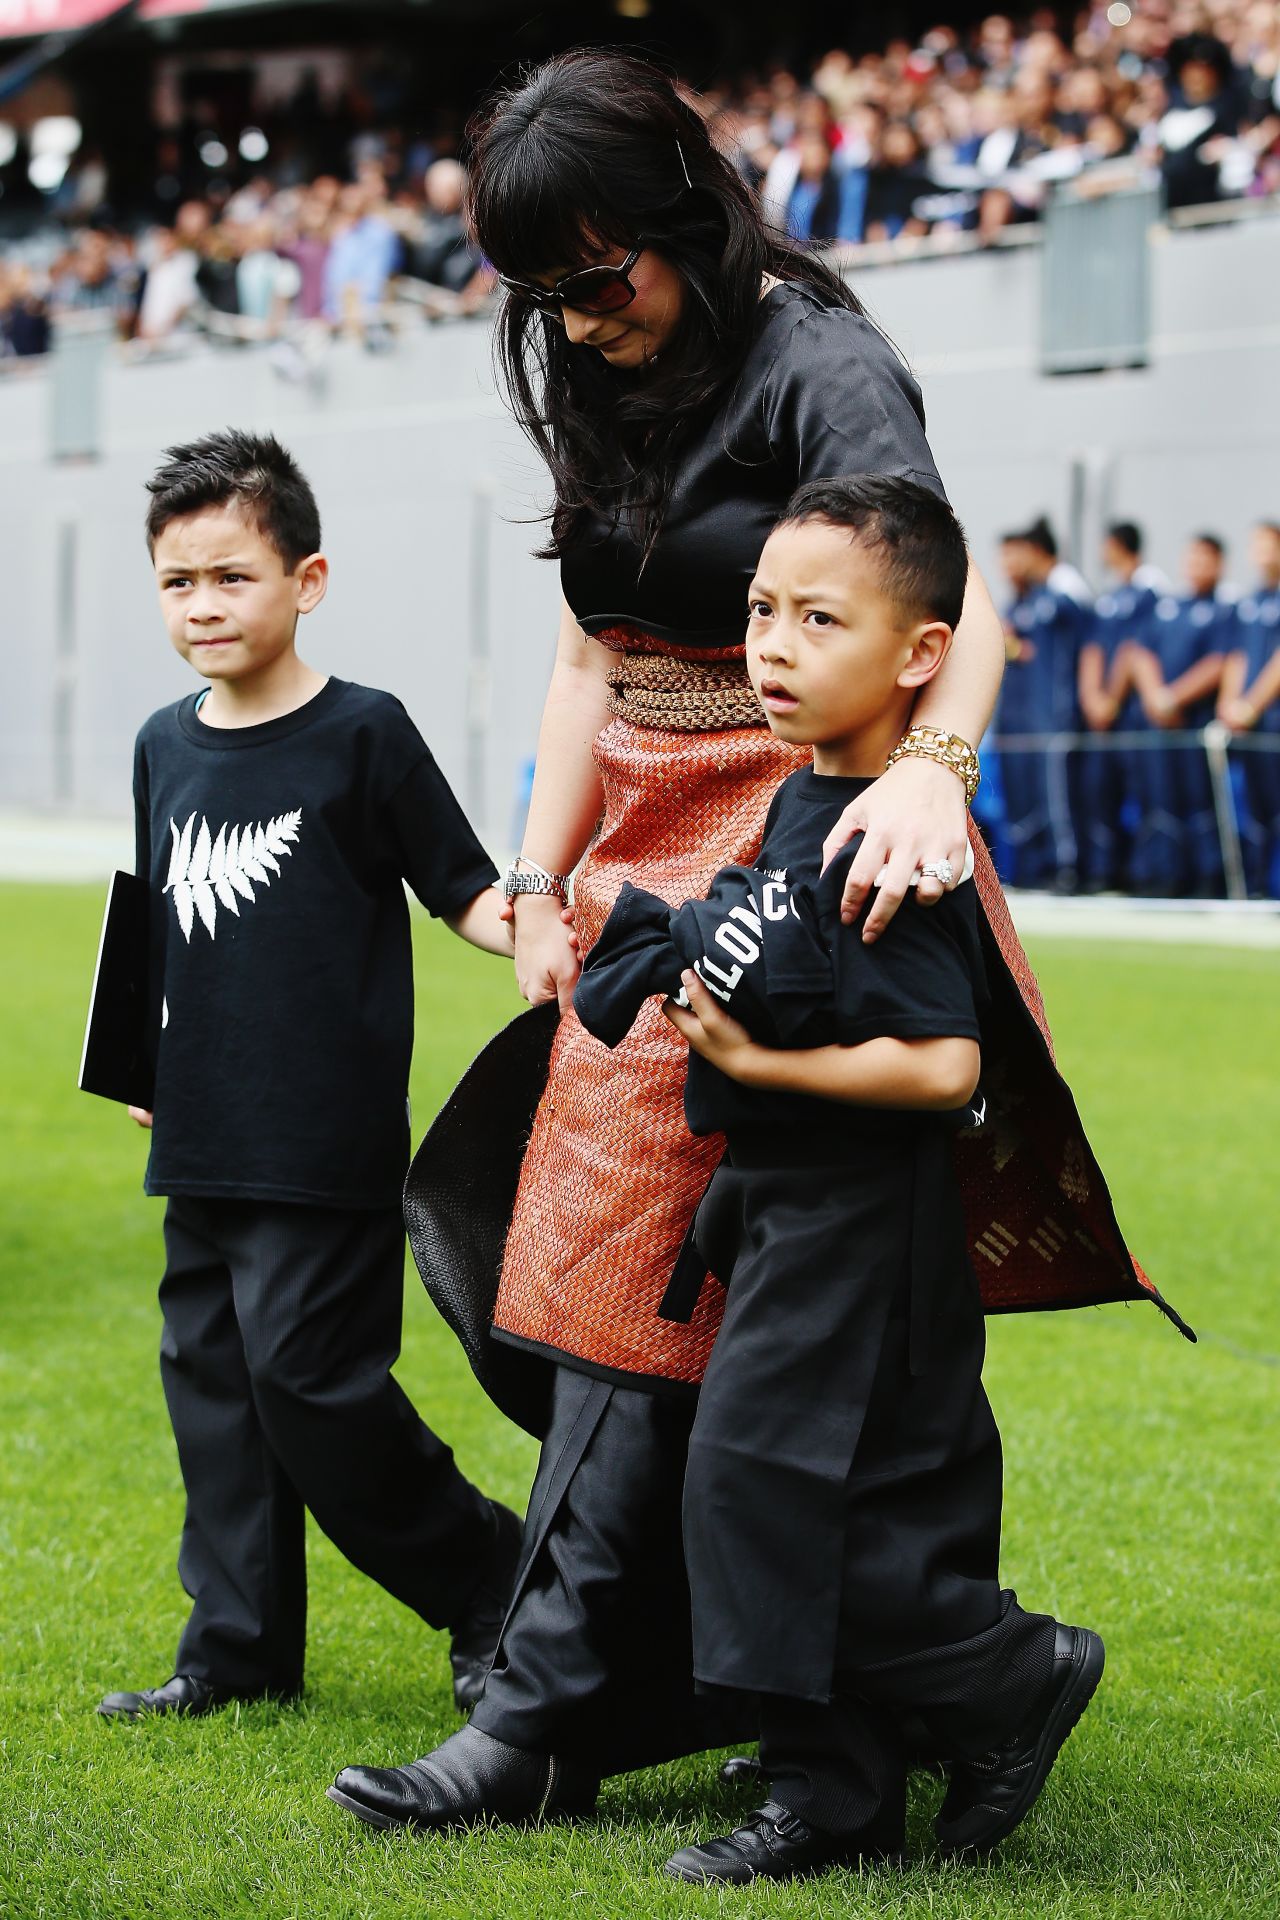 Lomu also left behind two sons, Brayley and Dhyreille.